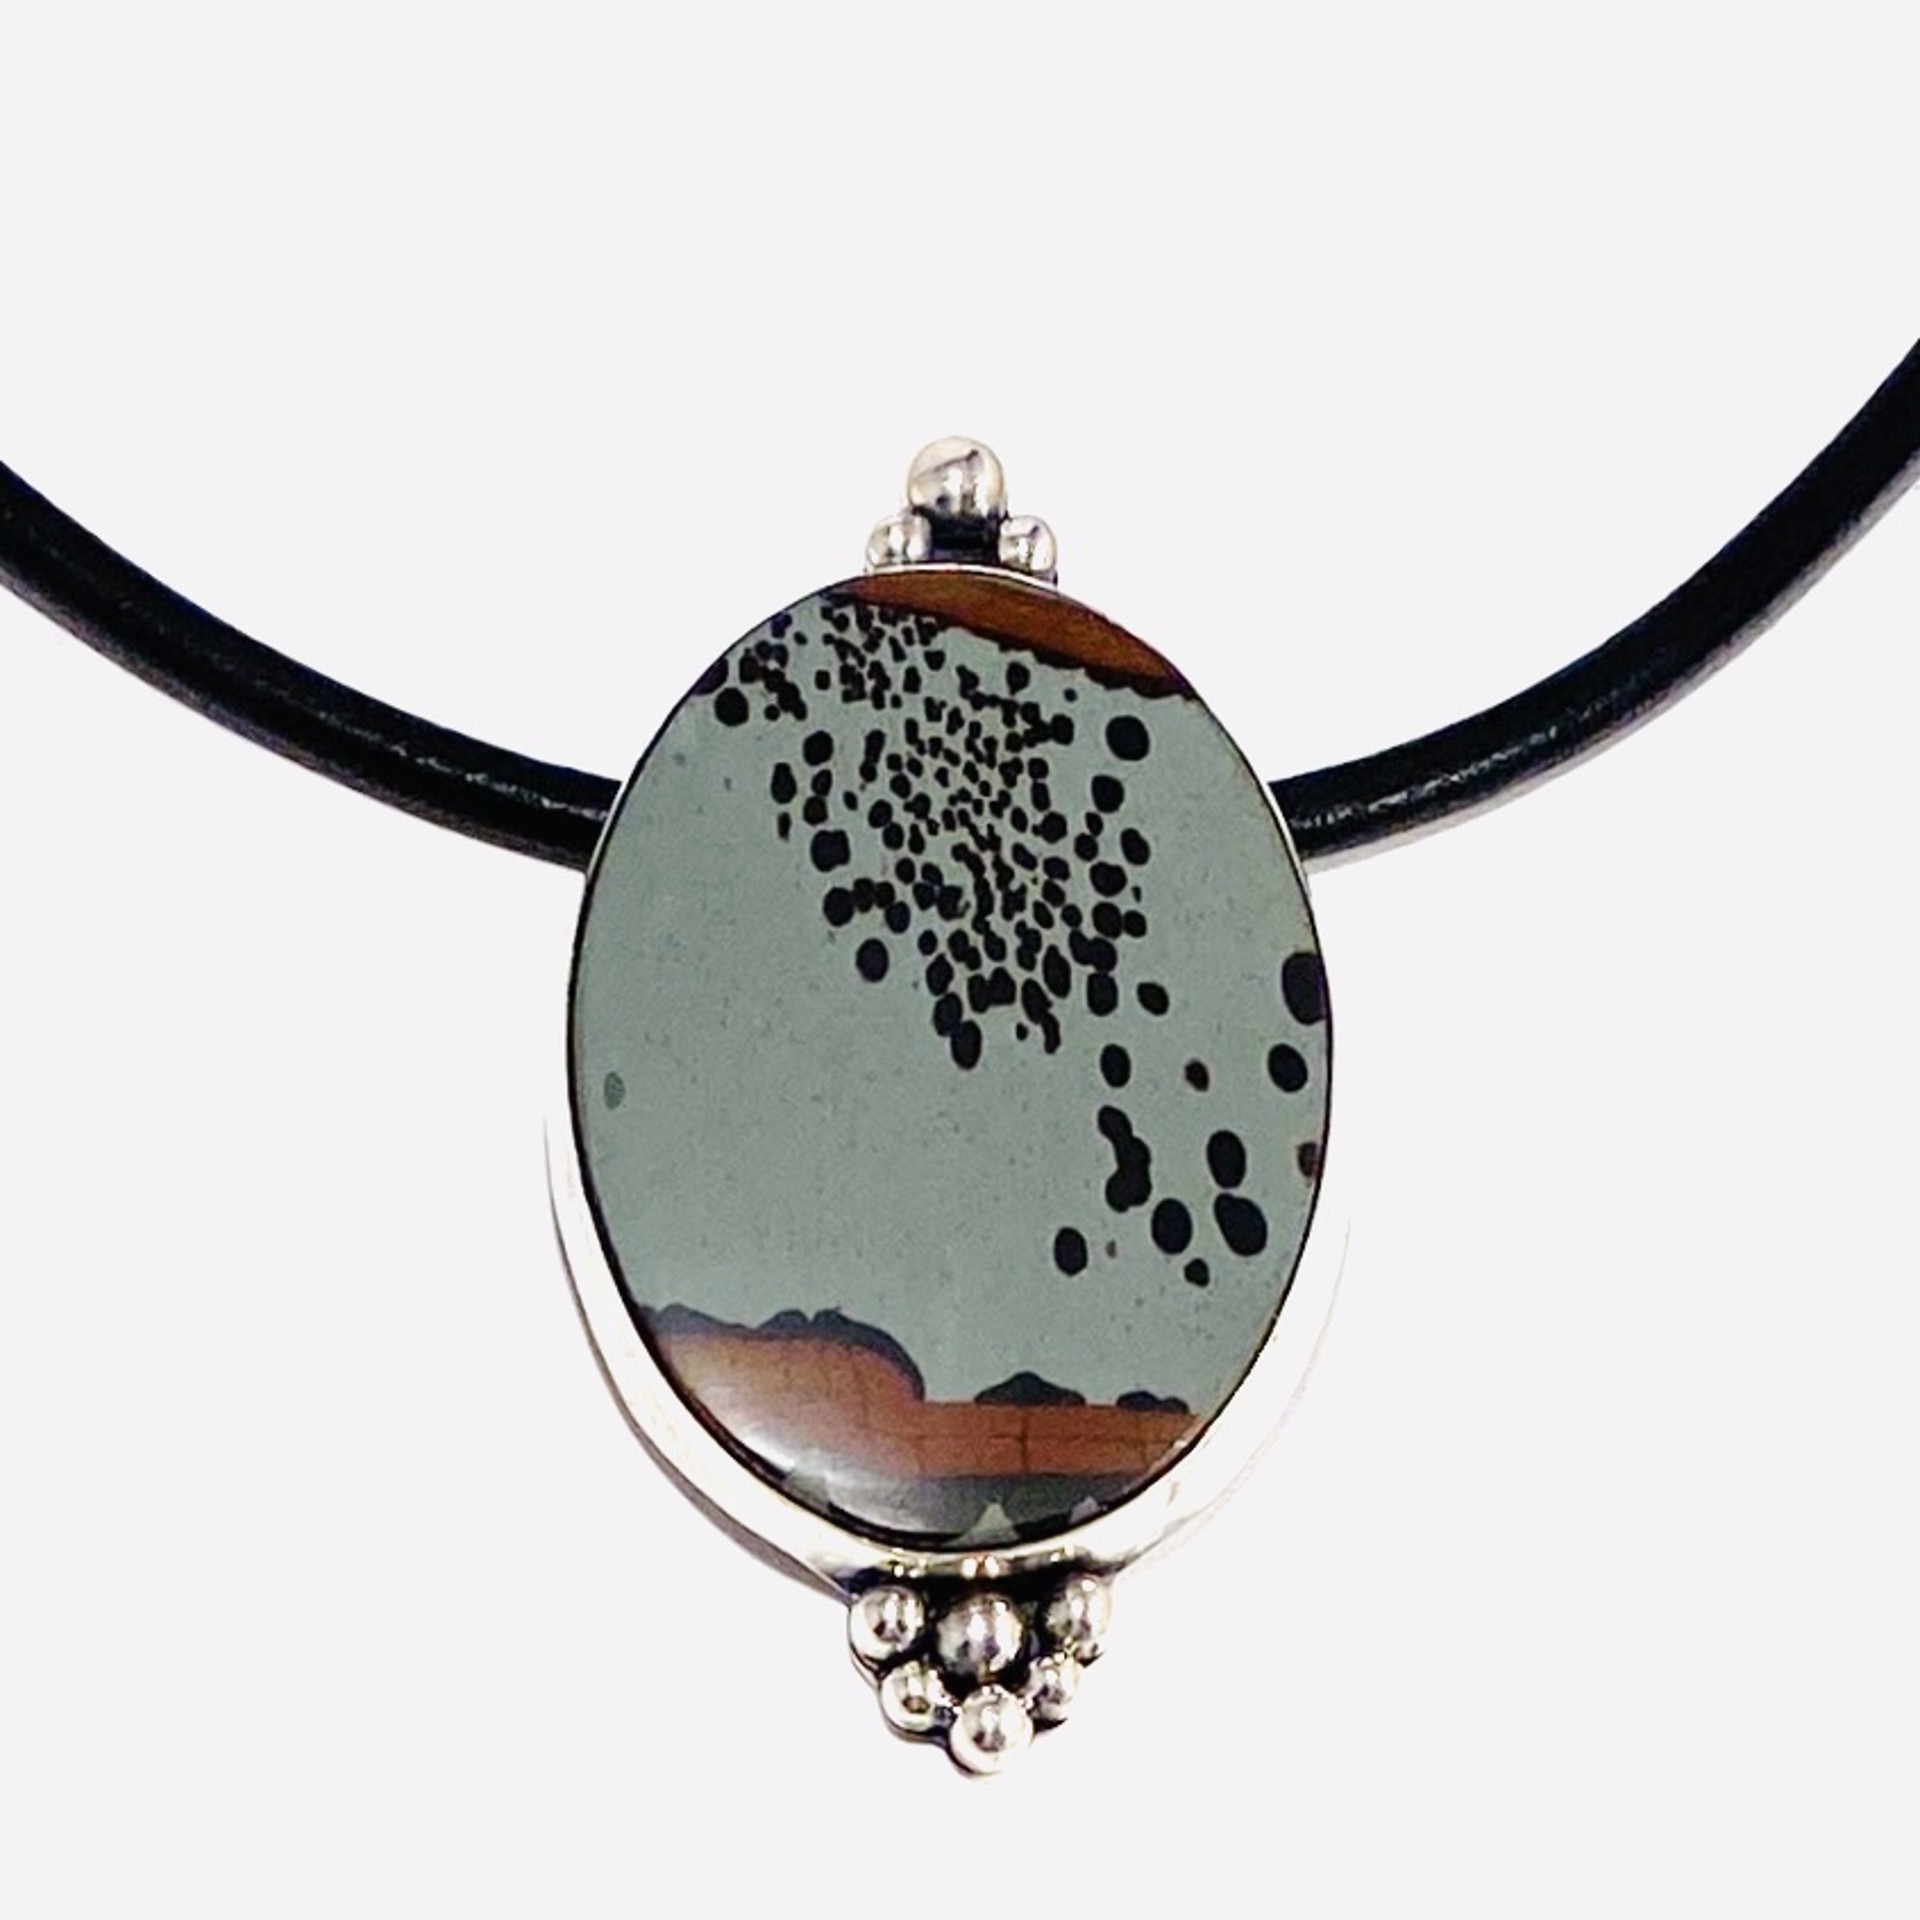 Large Oval “Rain On The Rockies” Indian Paint Jasper Inlay, Pendant on Leather Cord Necklace AB23-26 by Anne Bivens